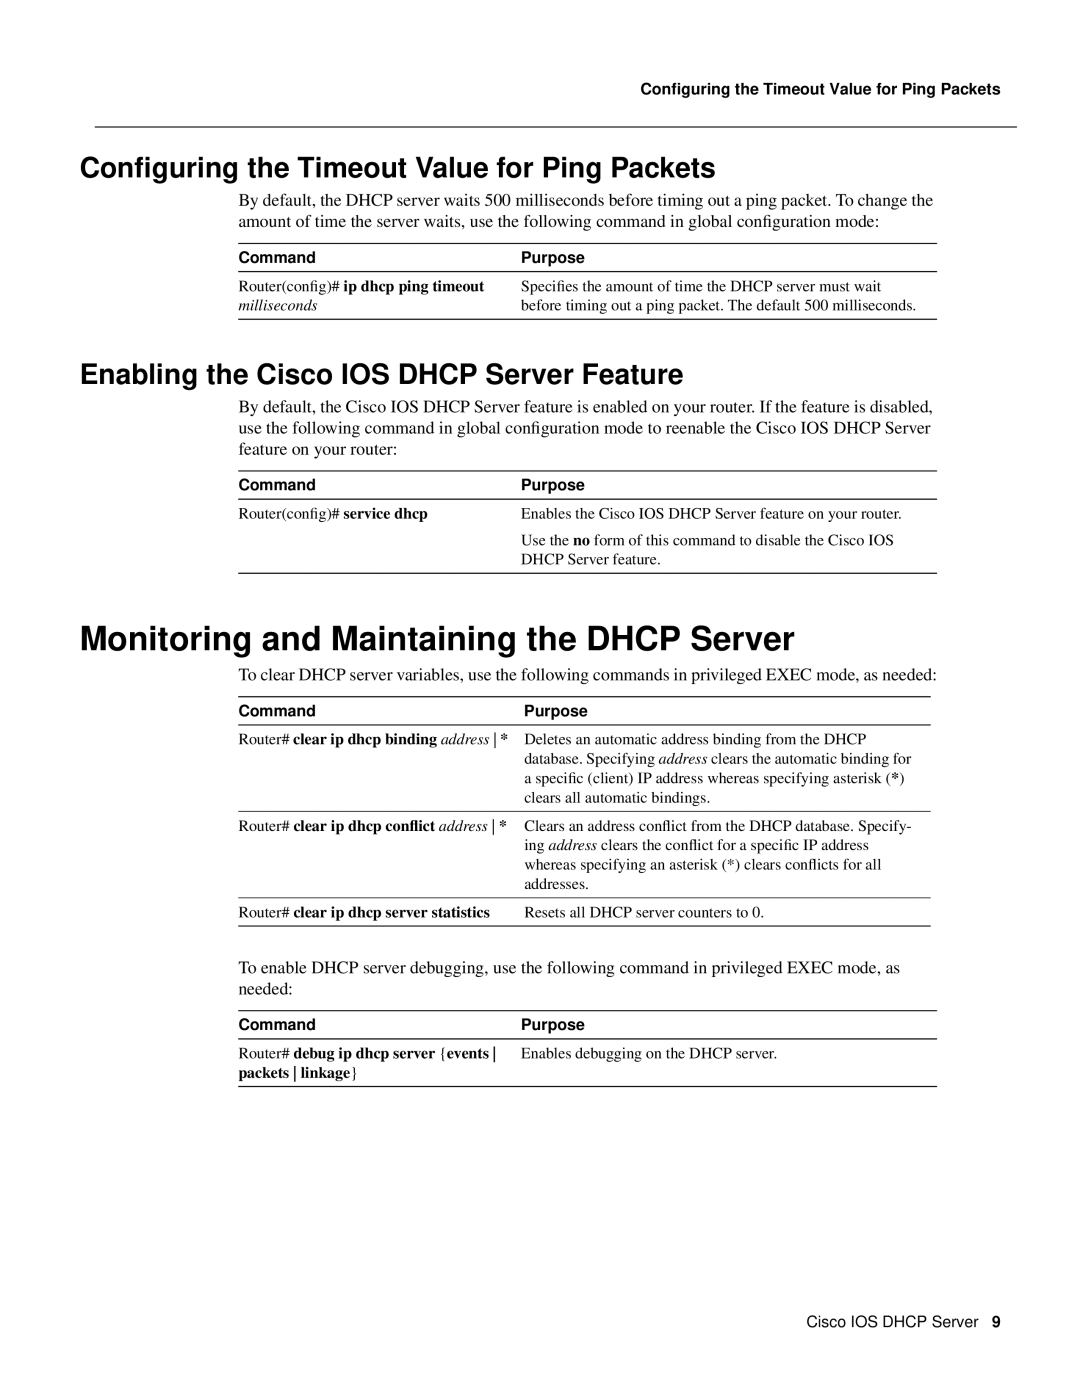 Cisco Systems 32369 manual Monitoring and Maintaining the DHCP Server, Conﬁguring the Timeout Value for Ping Packets 